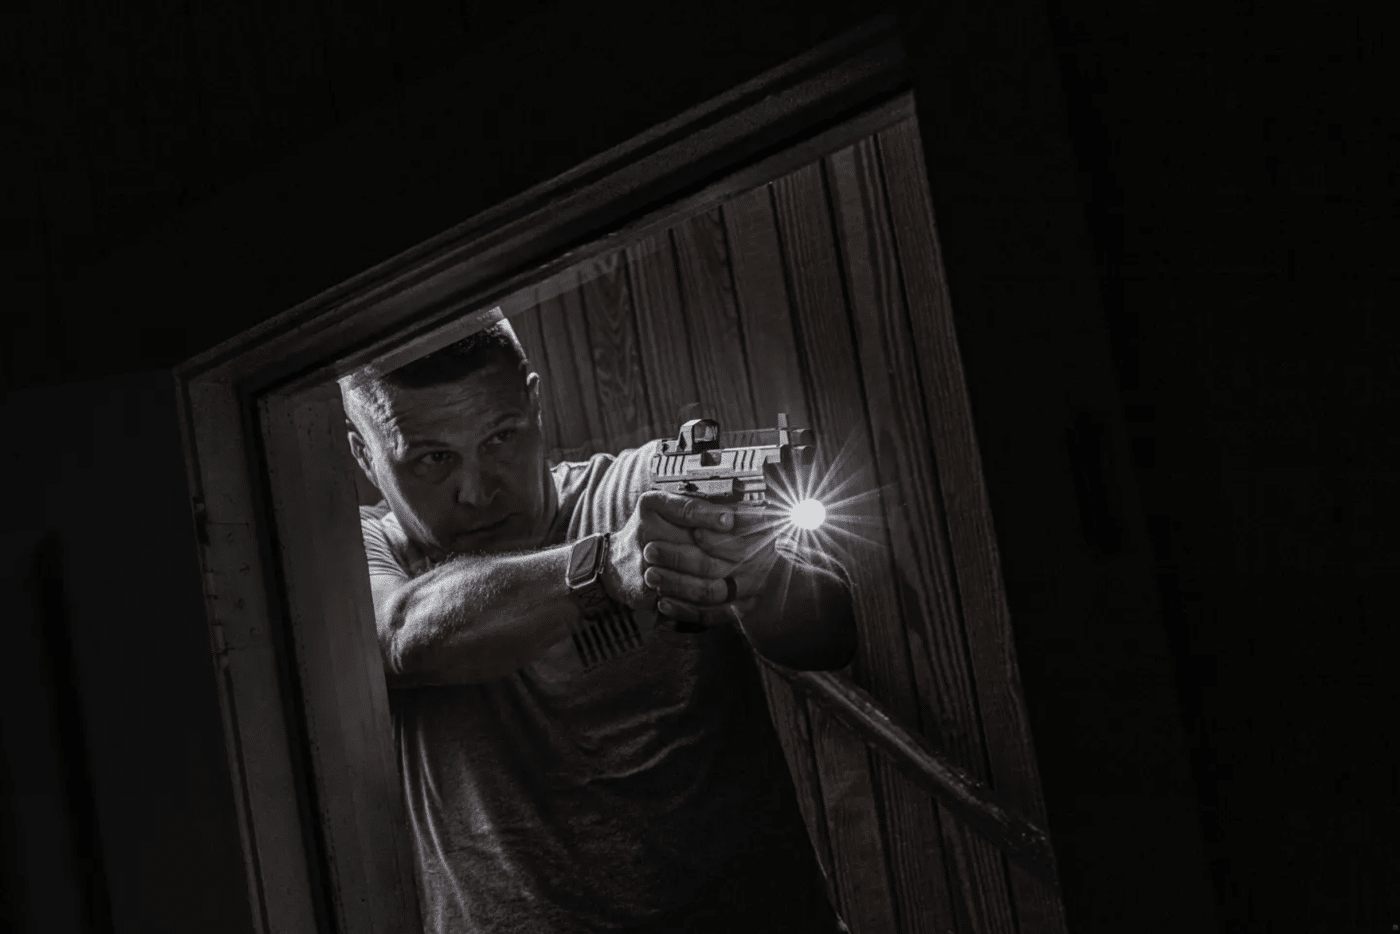 Man using a pistol with light in low light shooting situation